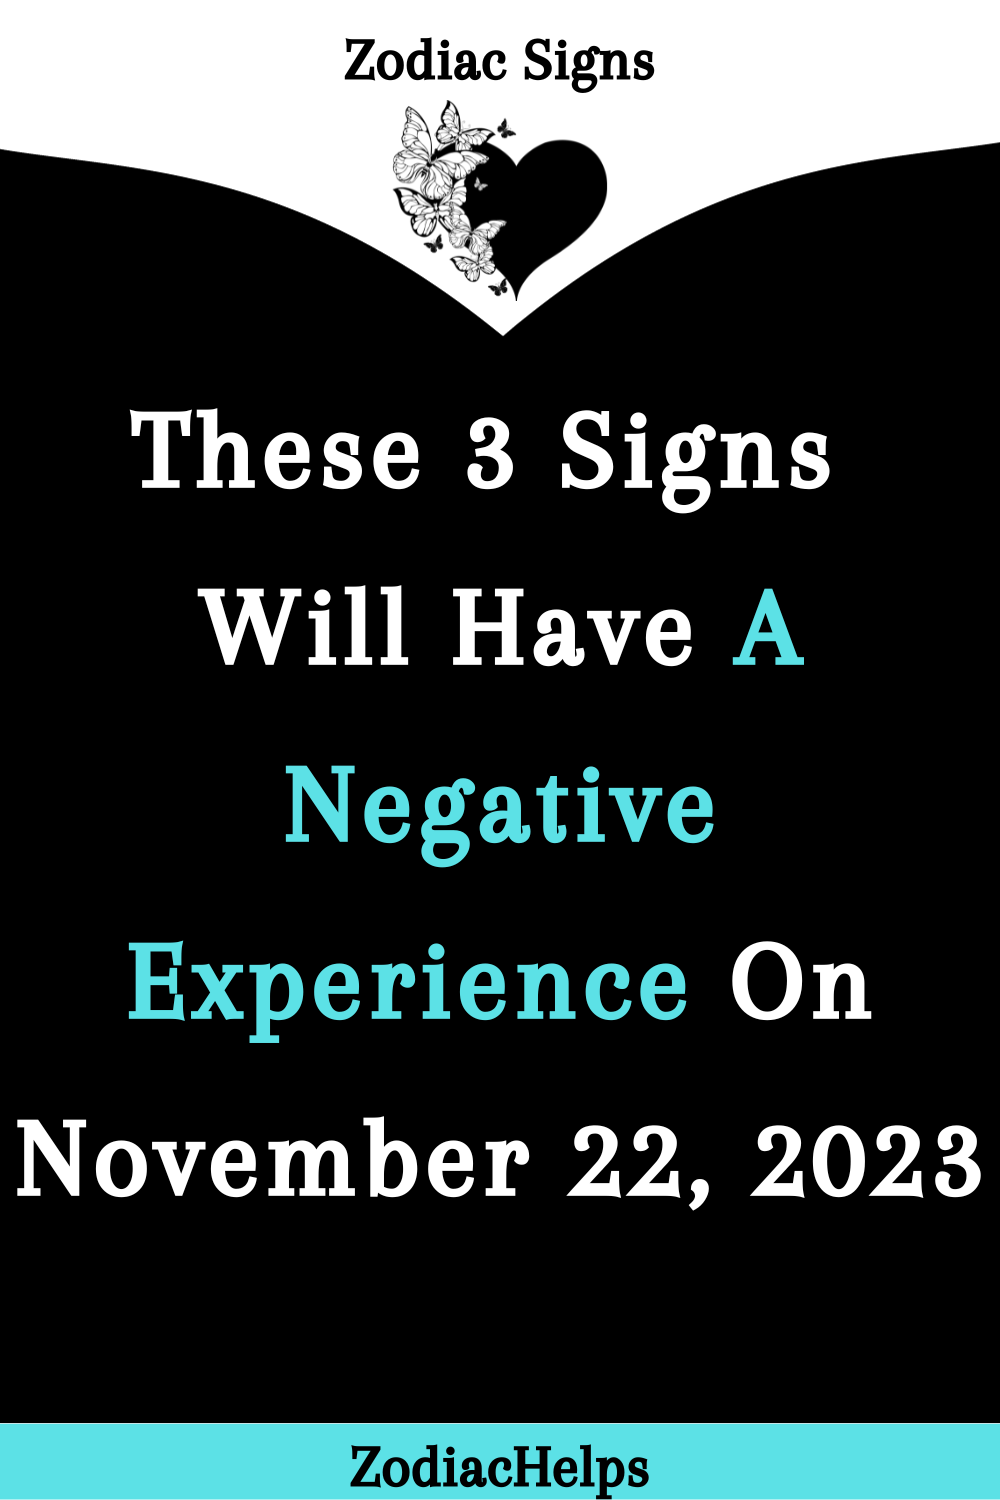 These 3 Signs Will Have A Negative Experience On November 22, 2023